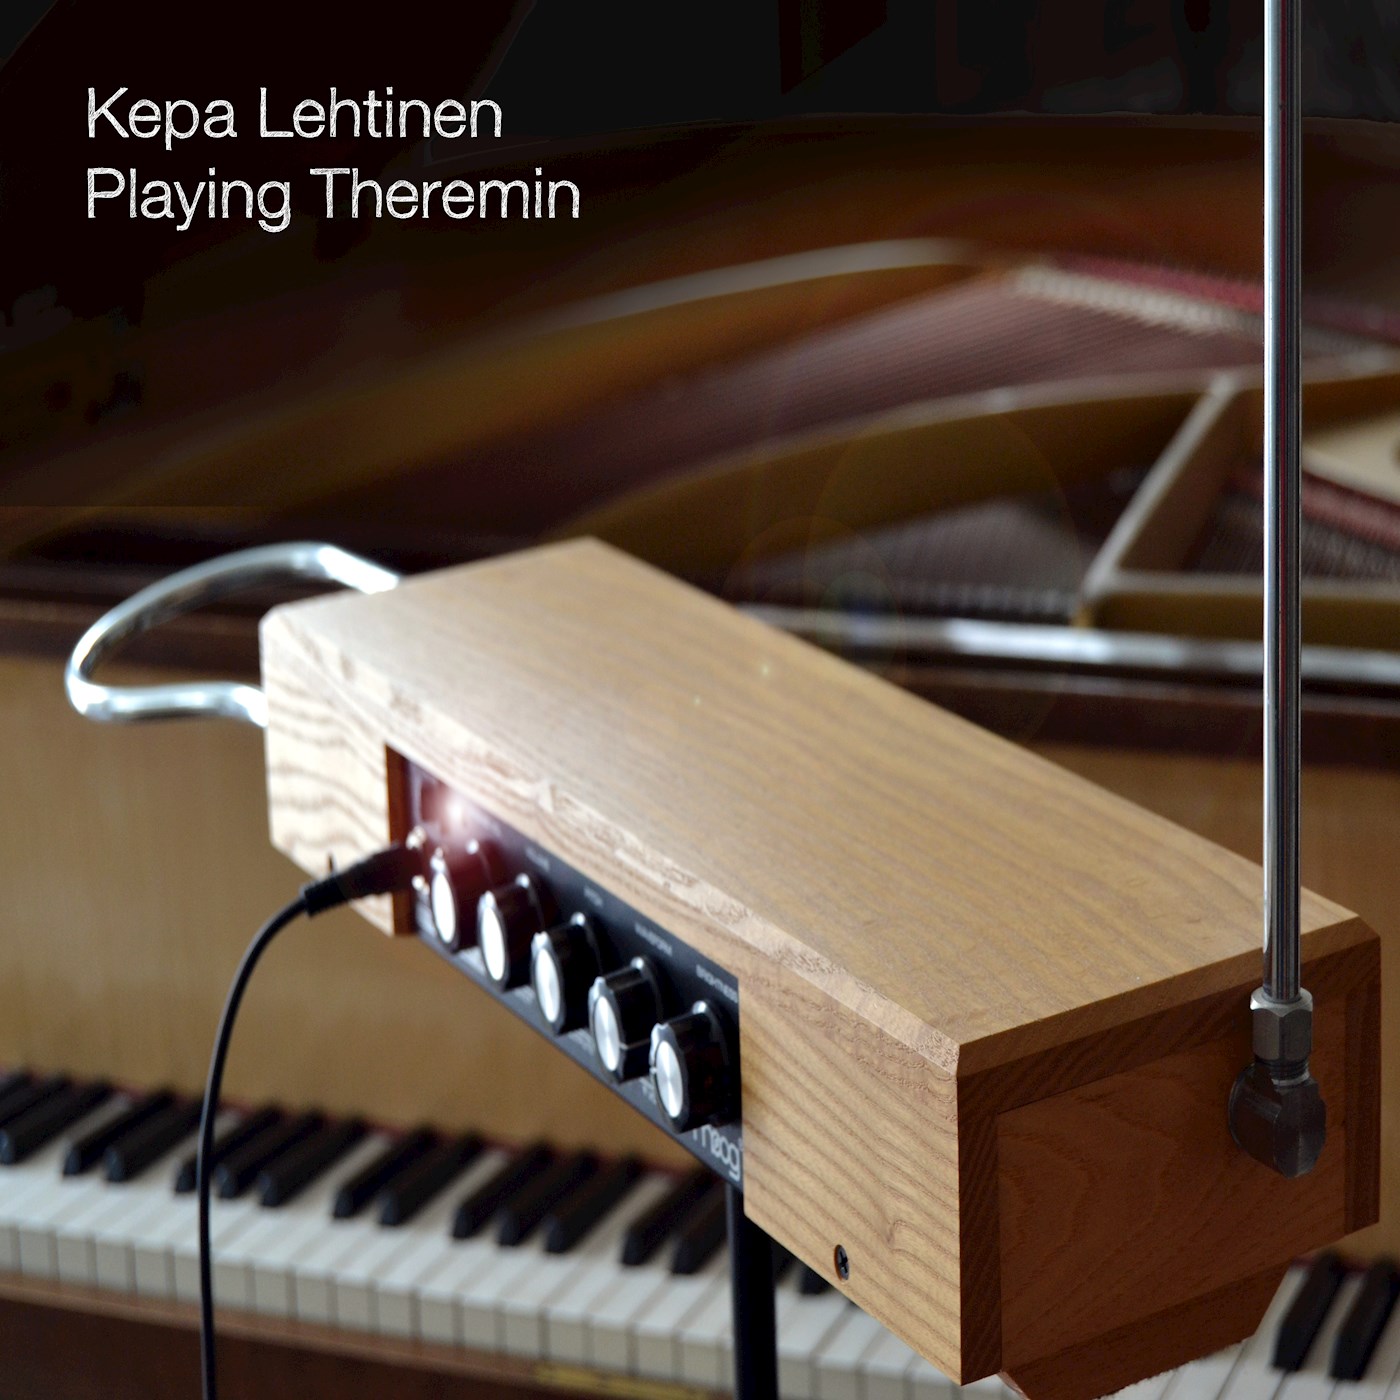 Playing Theremin